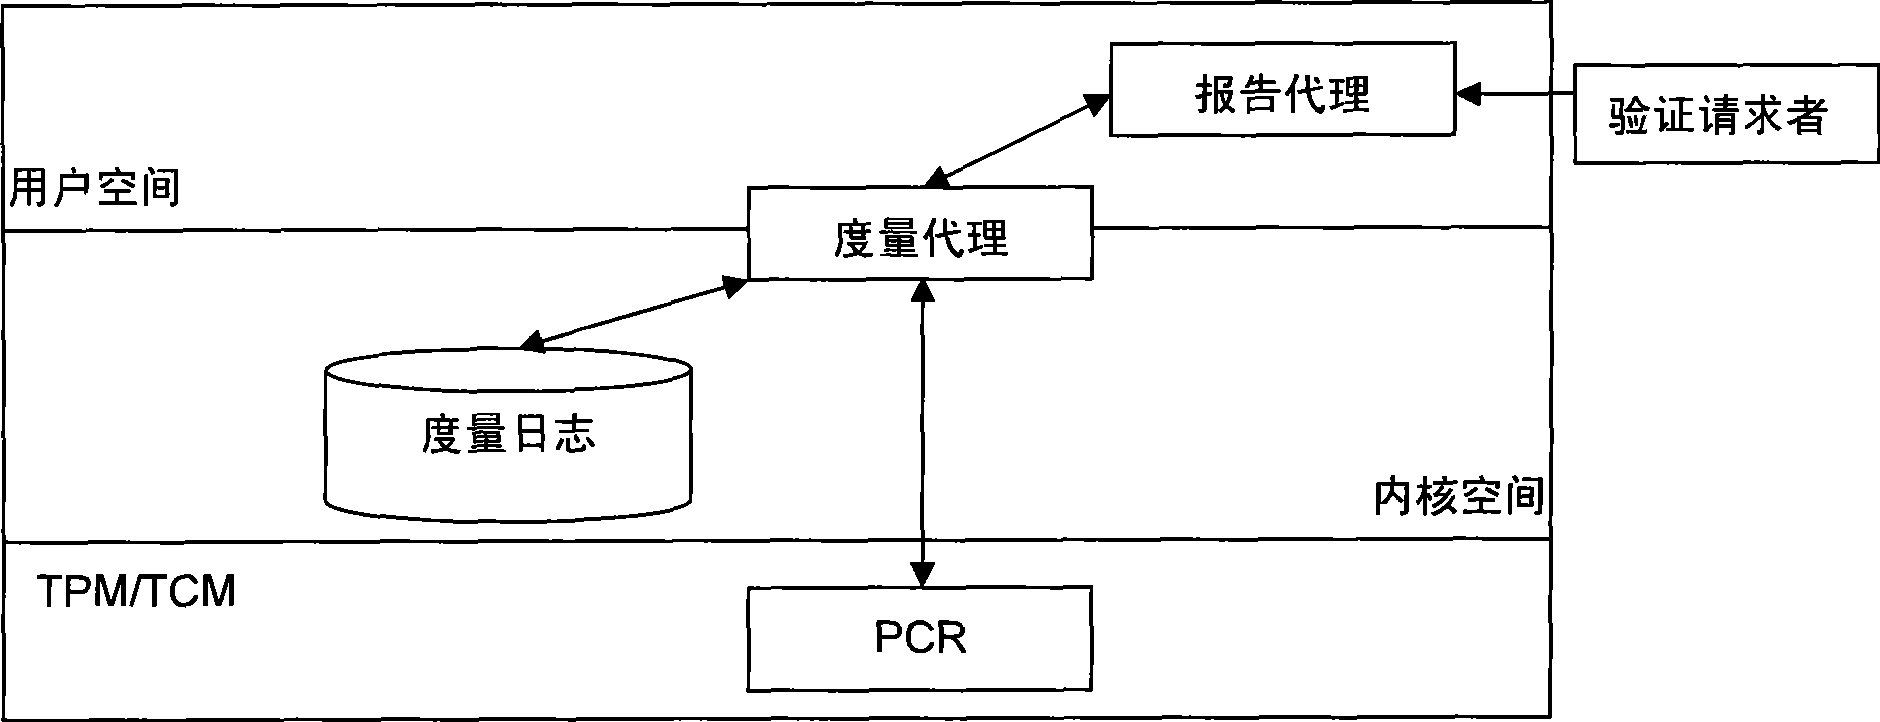 Remote proving method in trusted computation environment